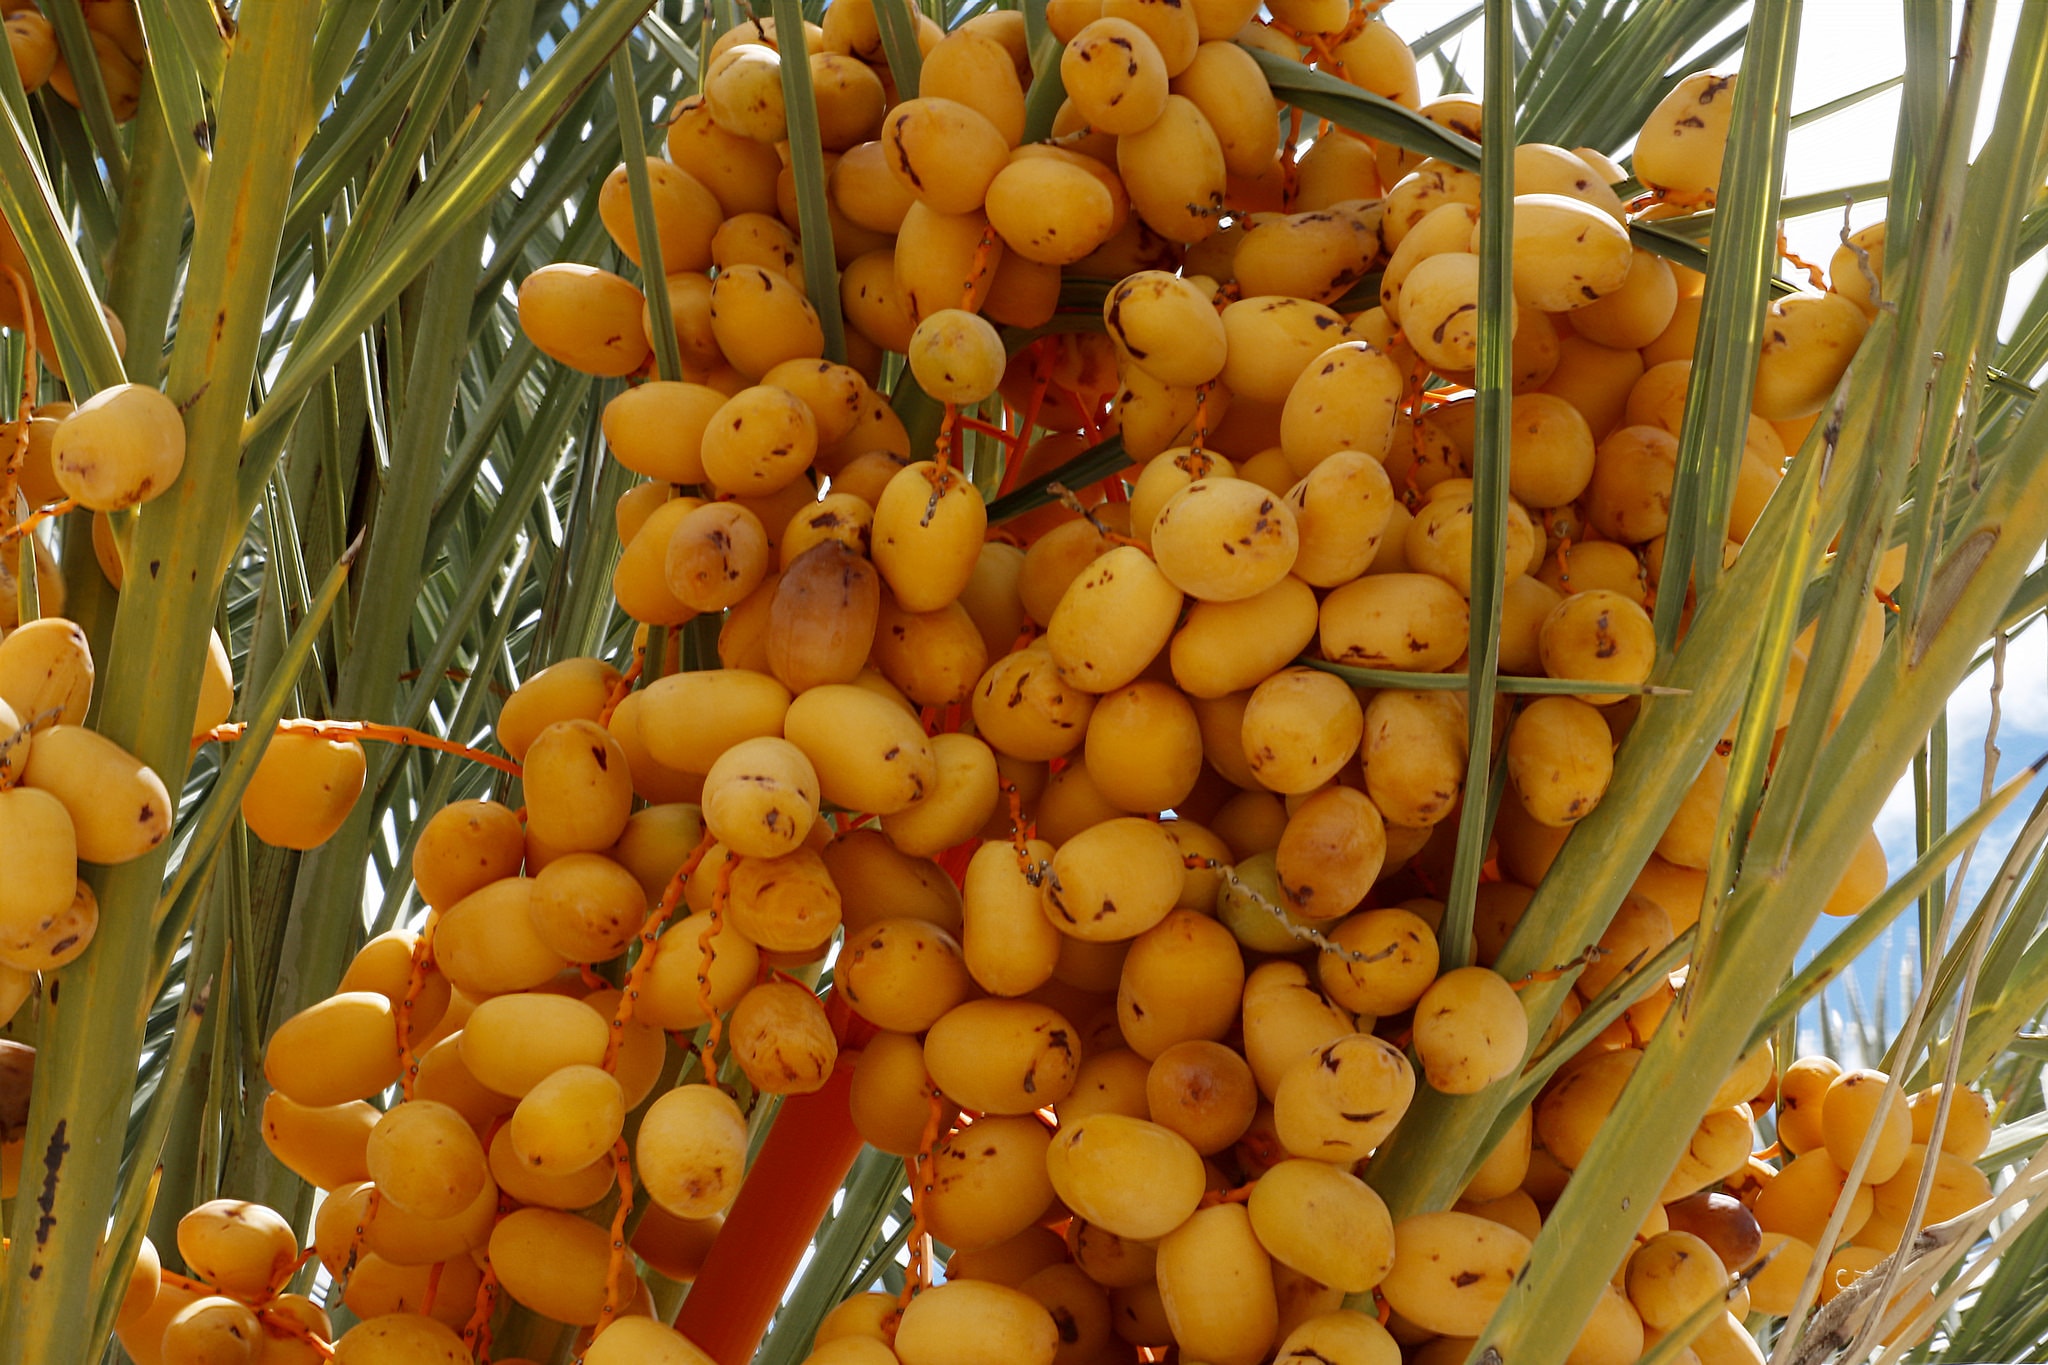 Wholesaler Dates in Malaysia: Your Source for Quality and Variety